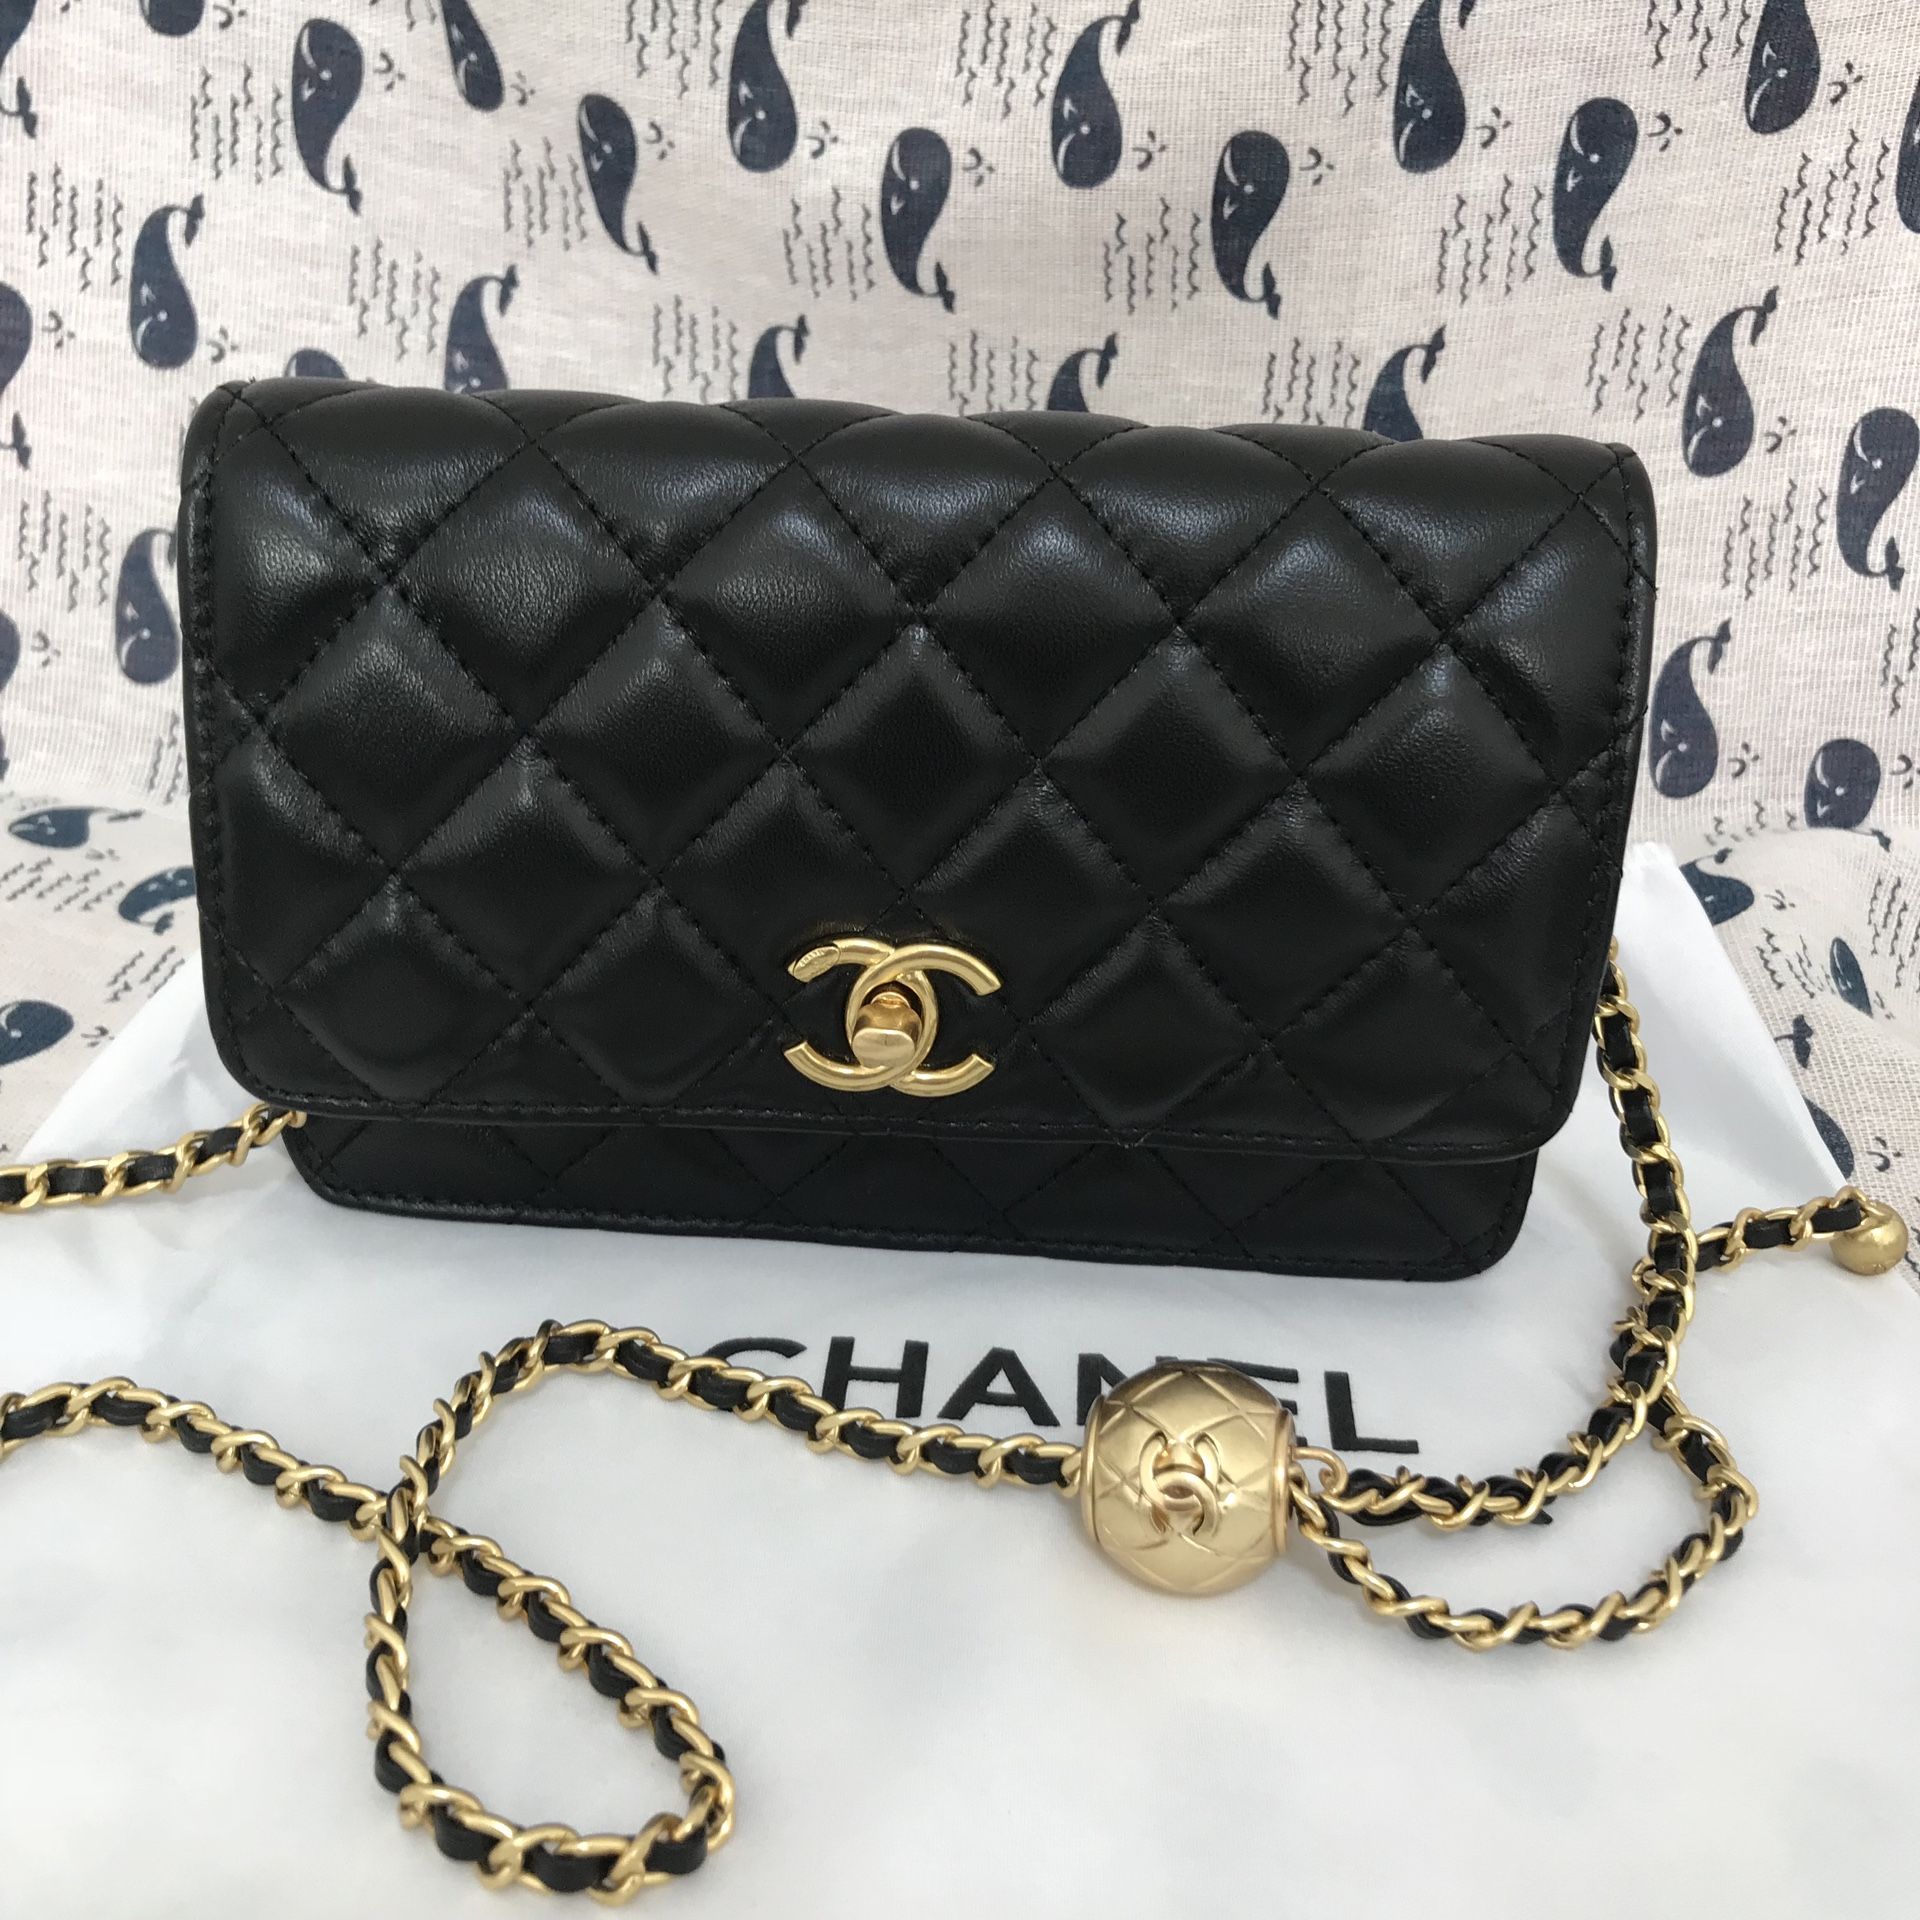 WOC CHANEL BLACK PEARL CRUSH WALLET ON A CHAIN BAG for Sale in